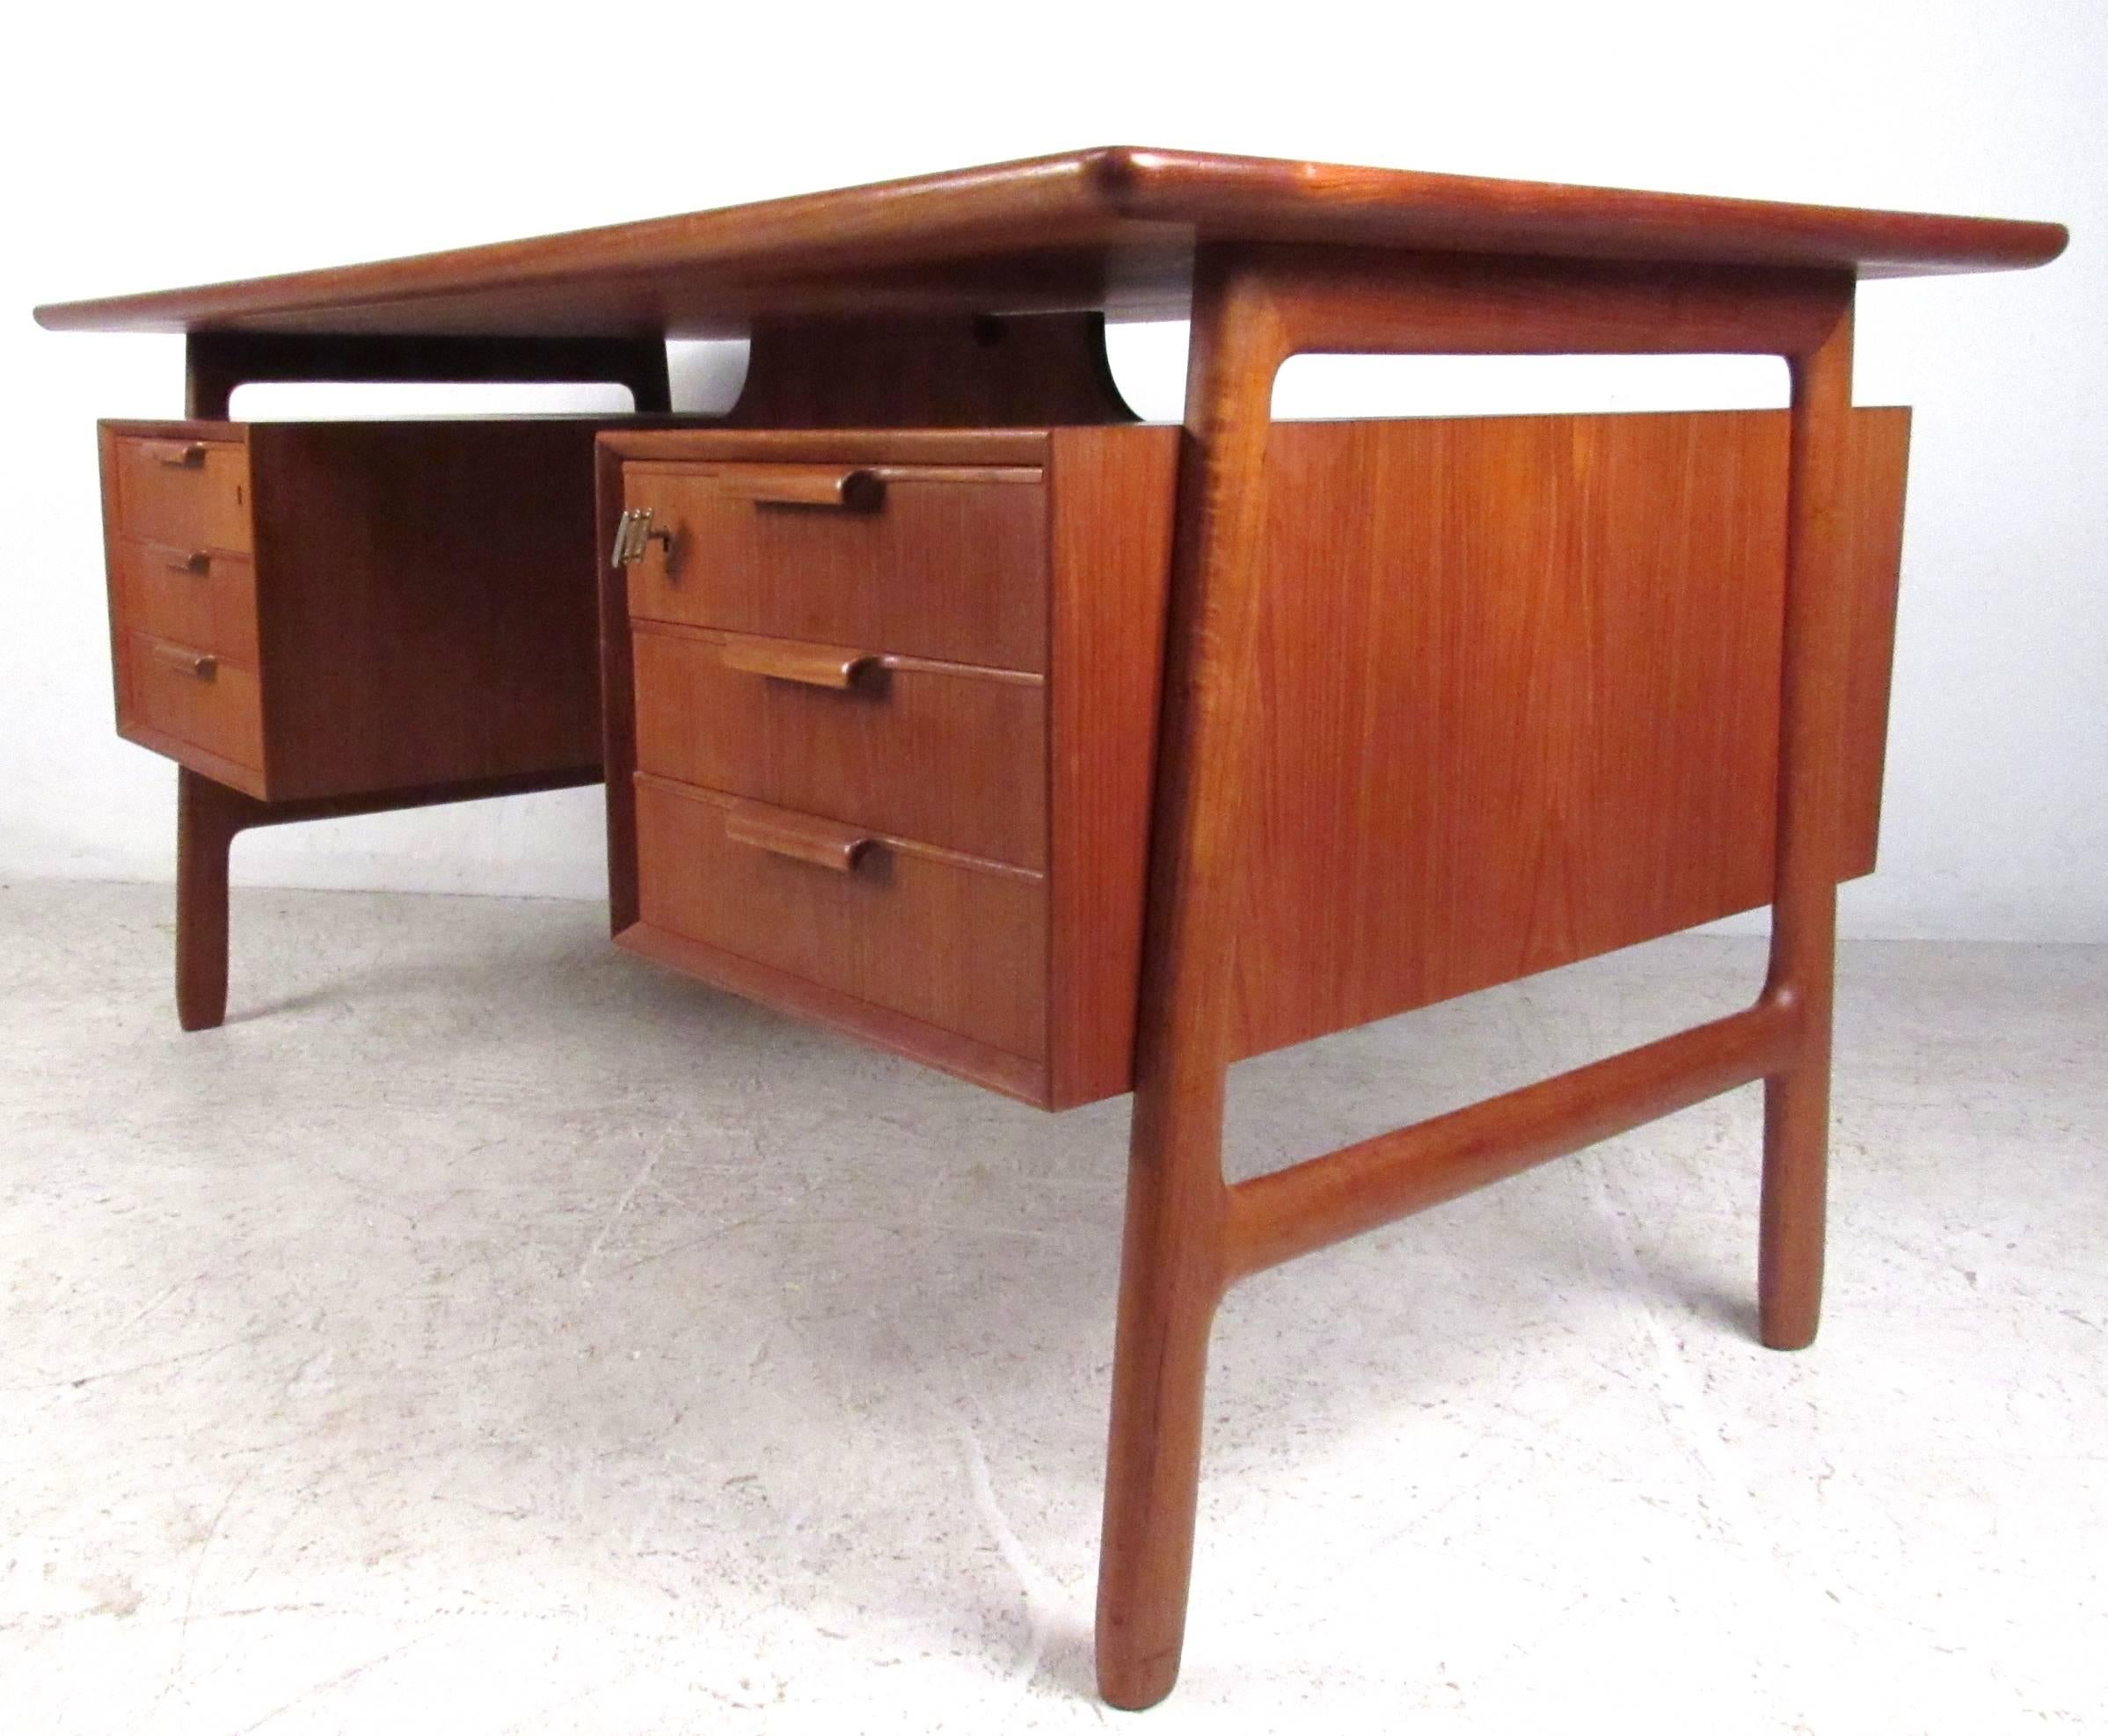 This beautiful vintage teak desk by Oman Junior features a beautiful double-sided design with plenty of storage for home or office. Sculpted frame with floating top workspace, this Mid-Century style desk refuses to sacrifice style for storage space.